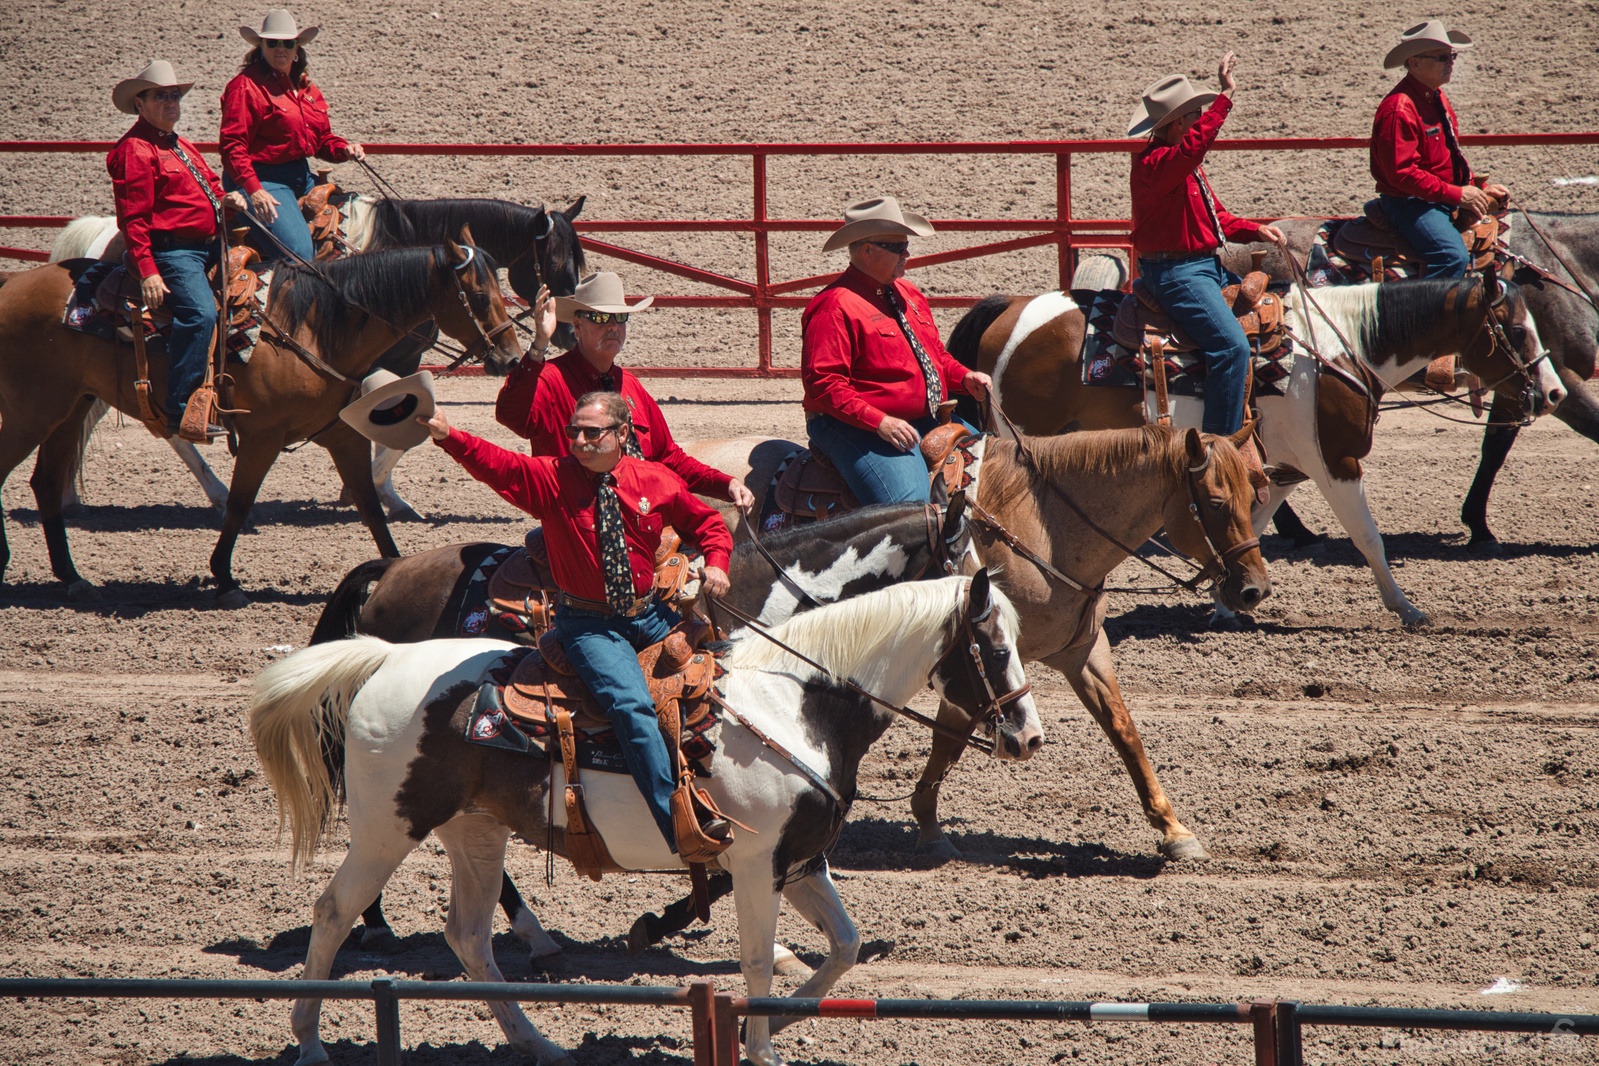 Image of Cheyenne Frontier Days, Wyoming by Jules Renahan